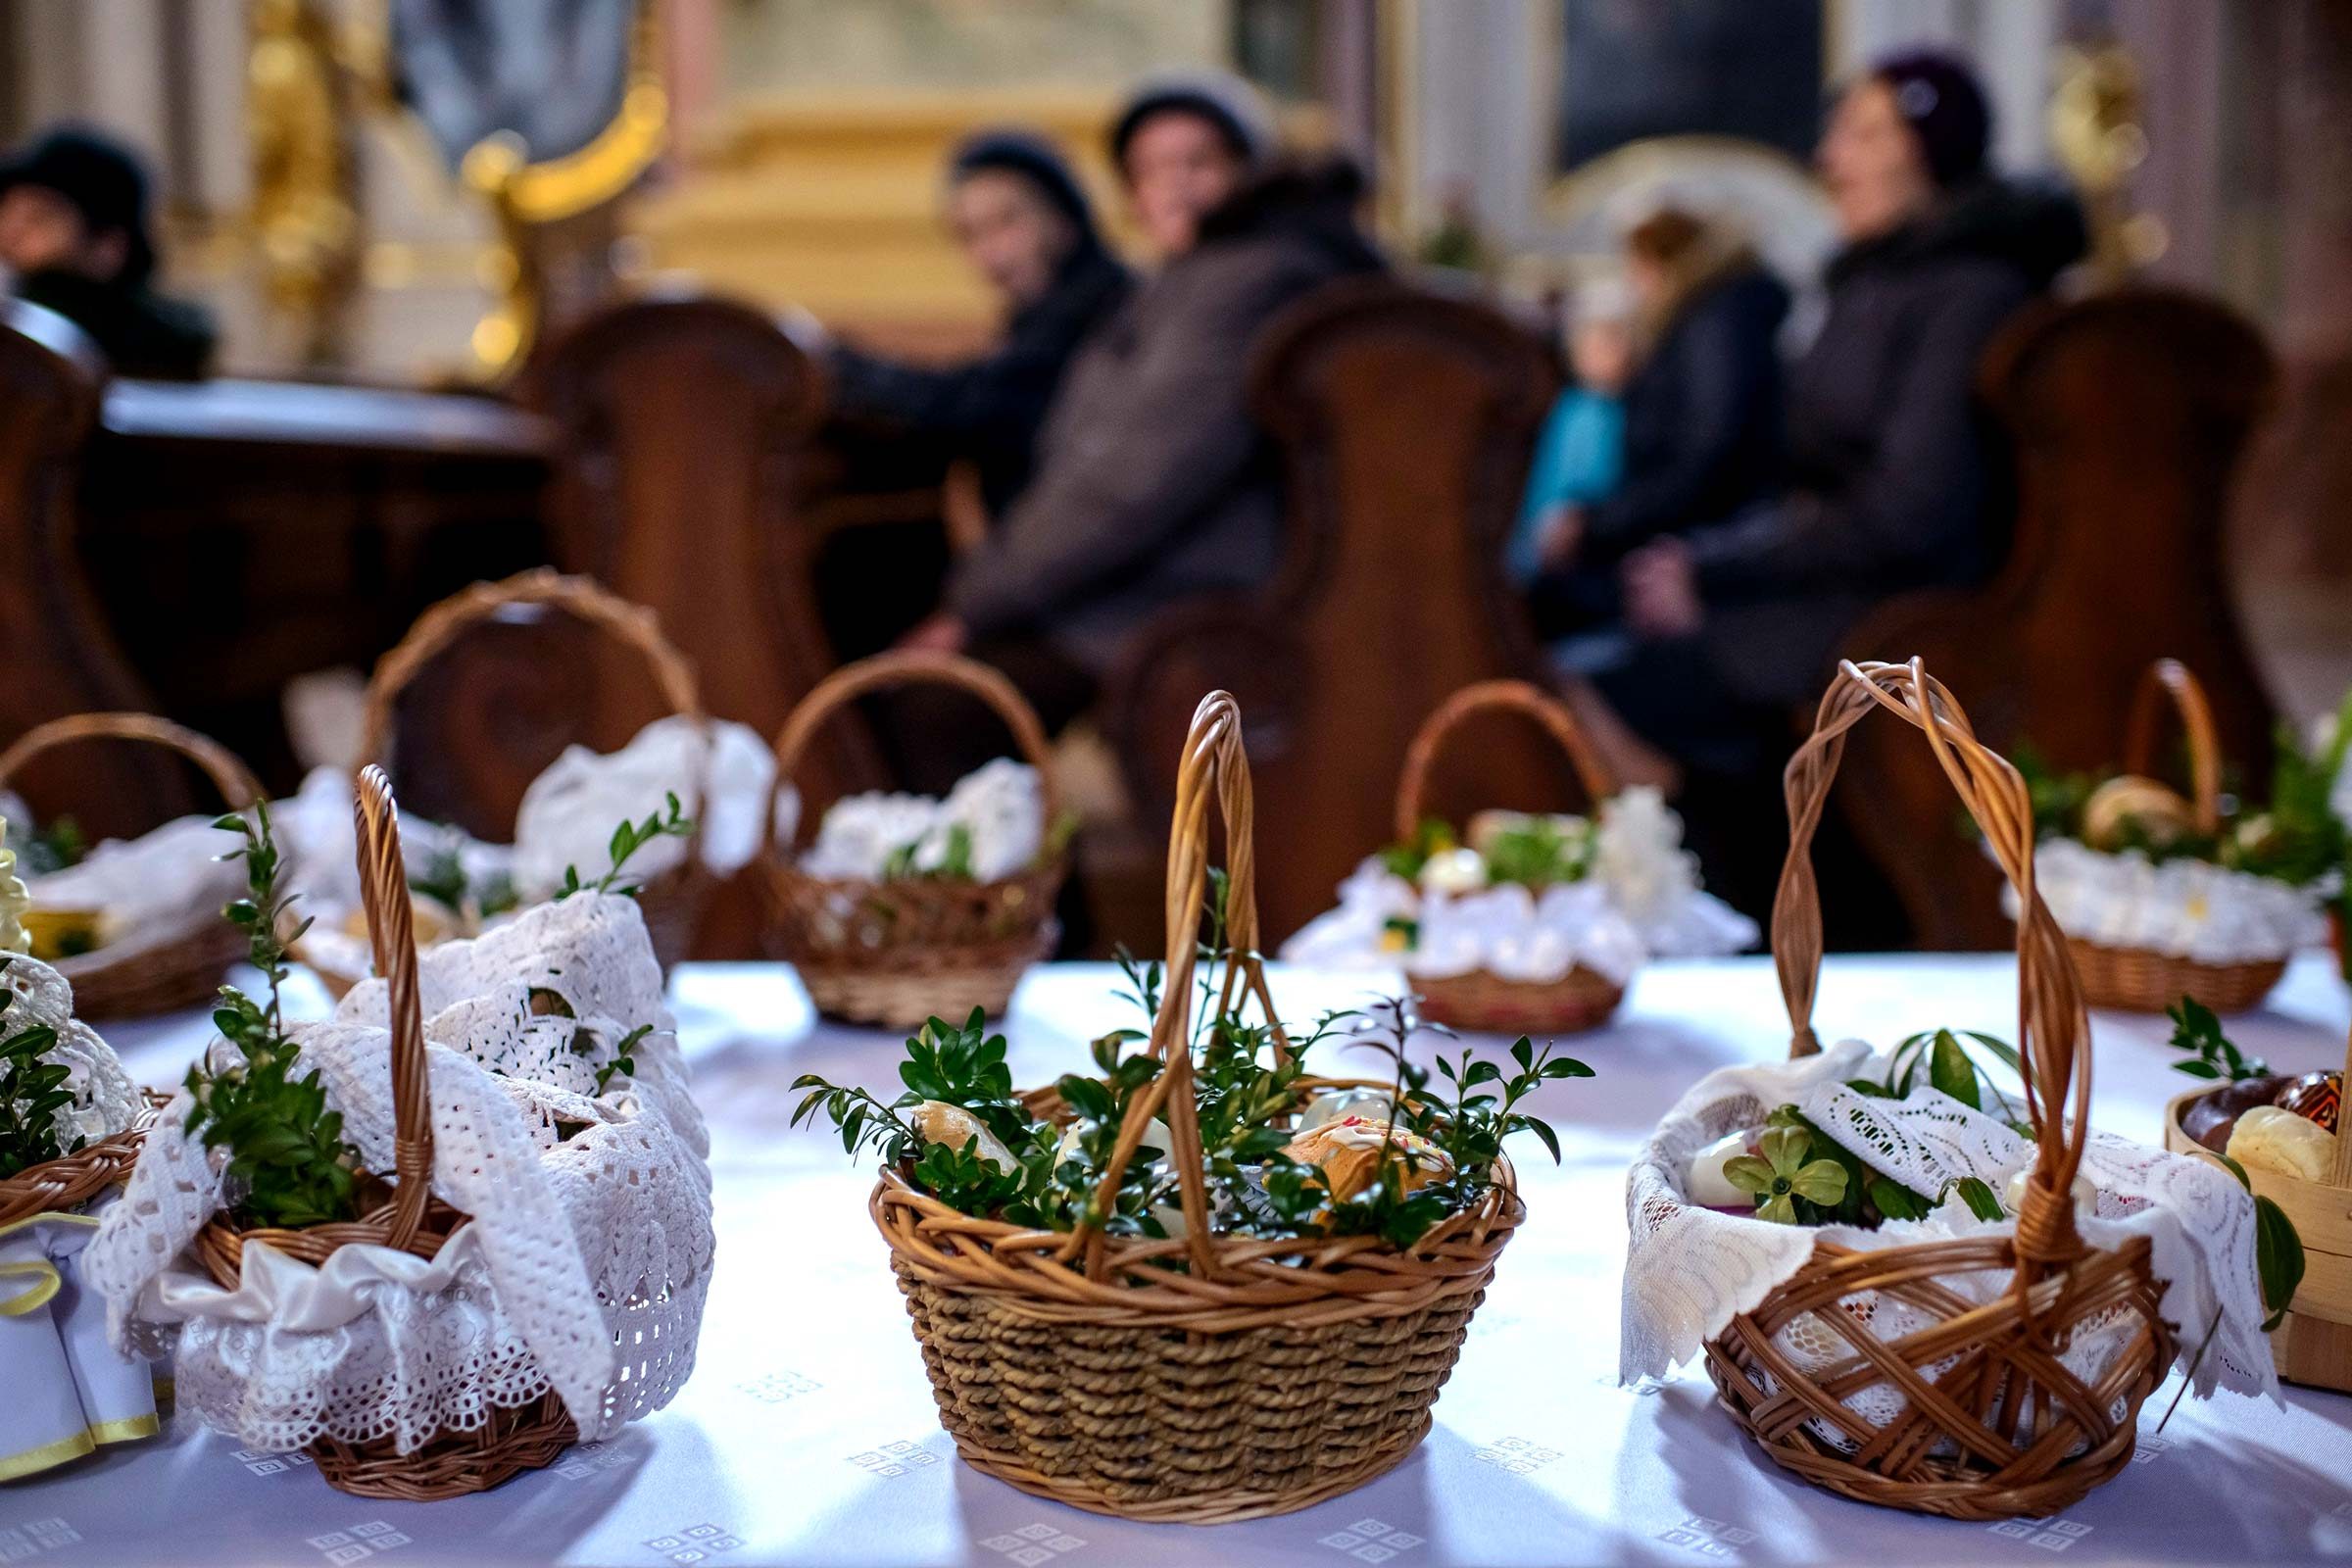 How Countries Celebrate Easter Around the World Reader’s Digest